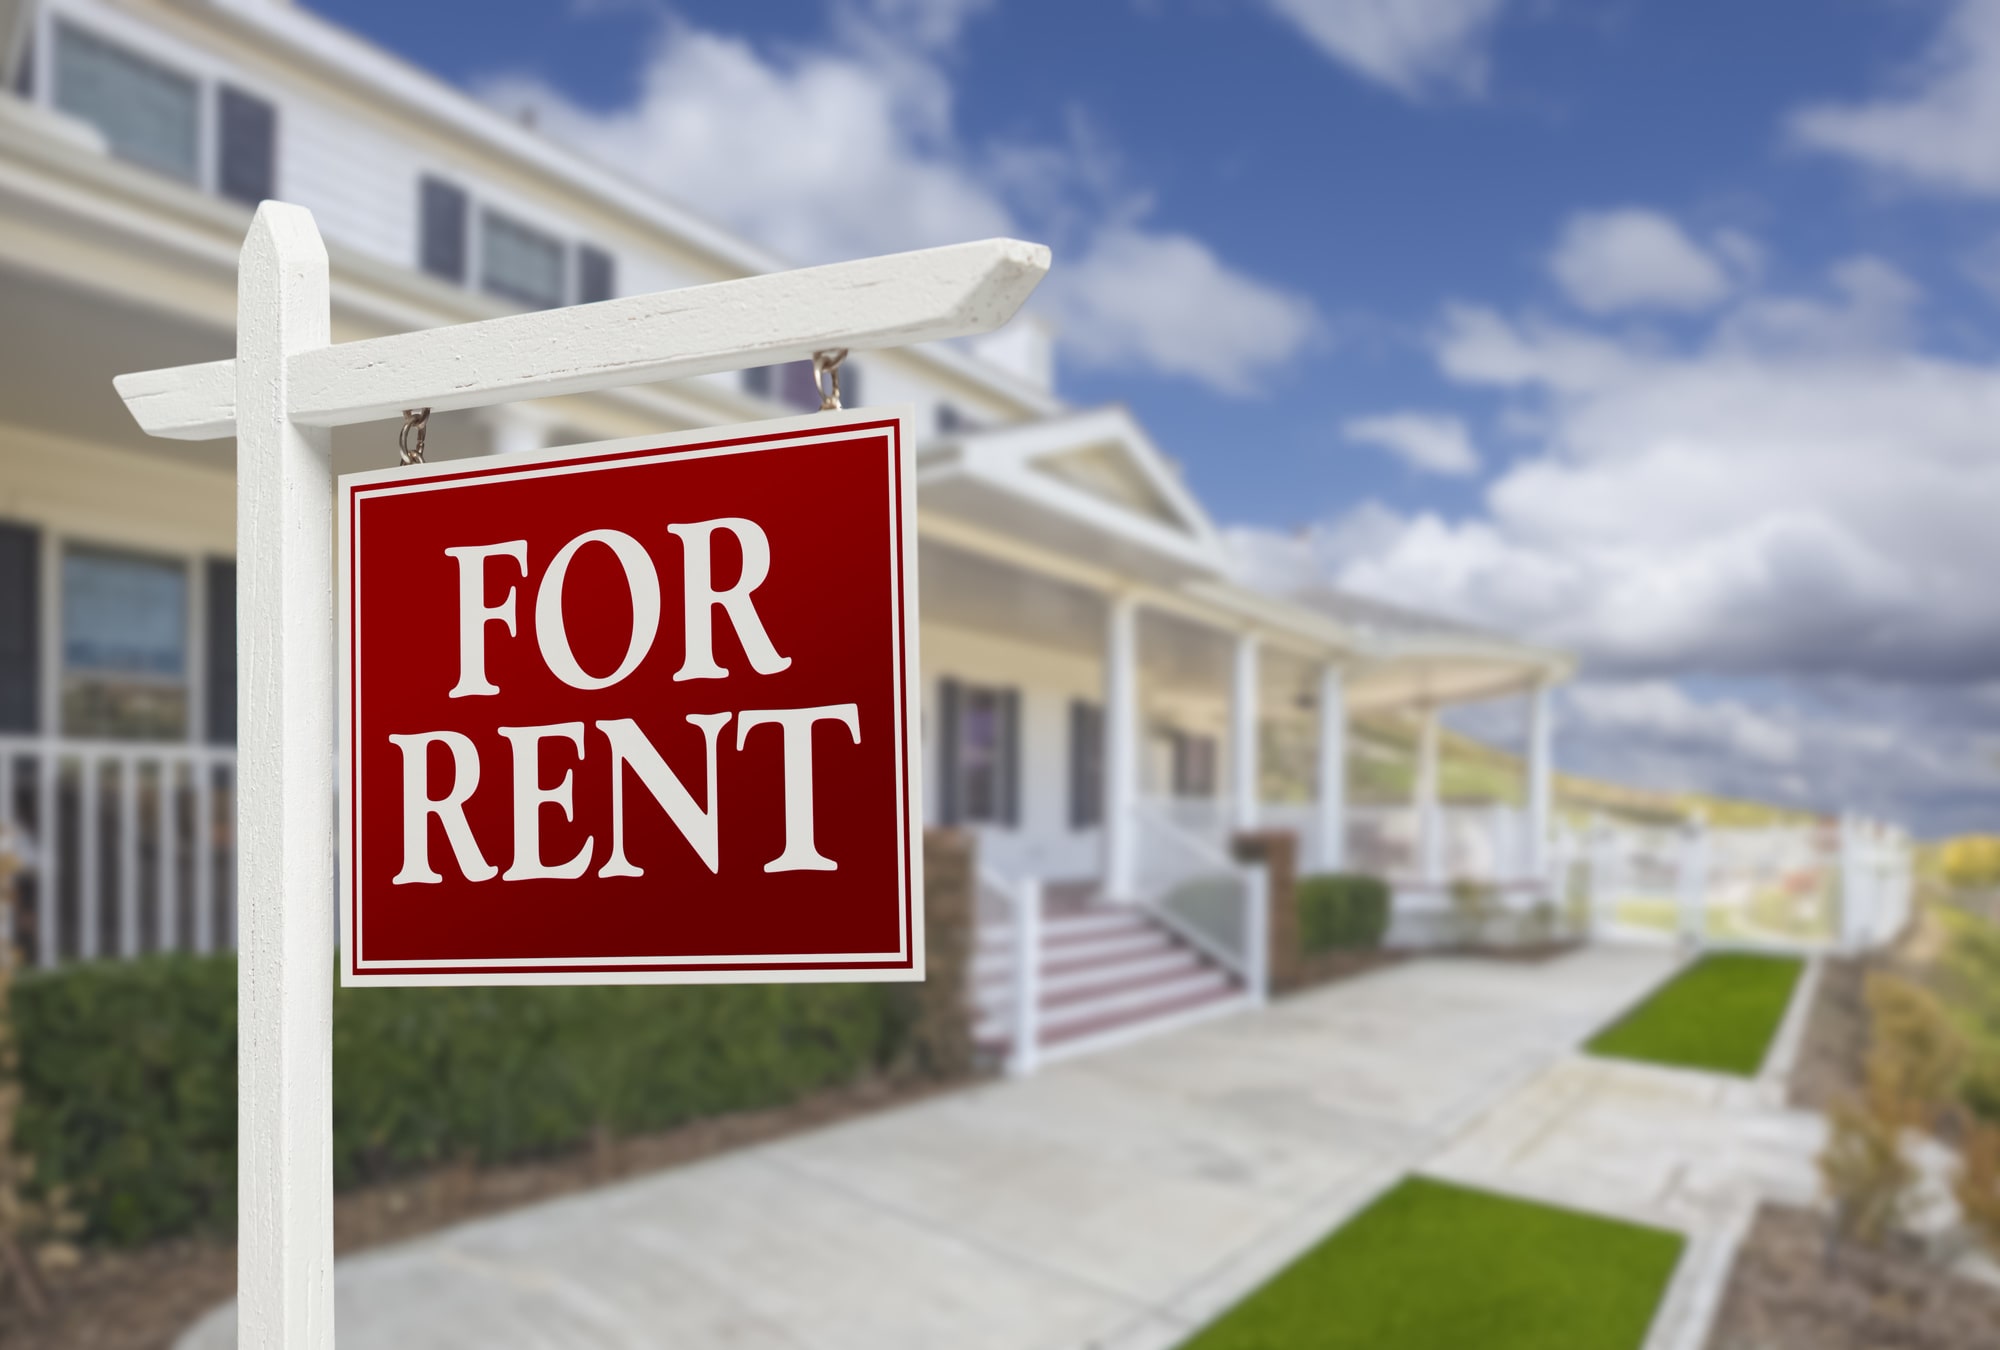 5 Valuable Things Every Rental Property Owner Needs To Know